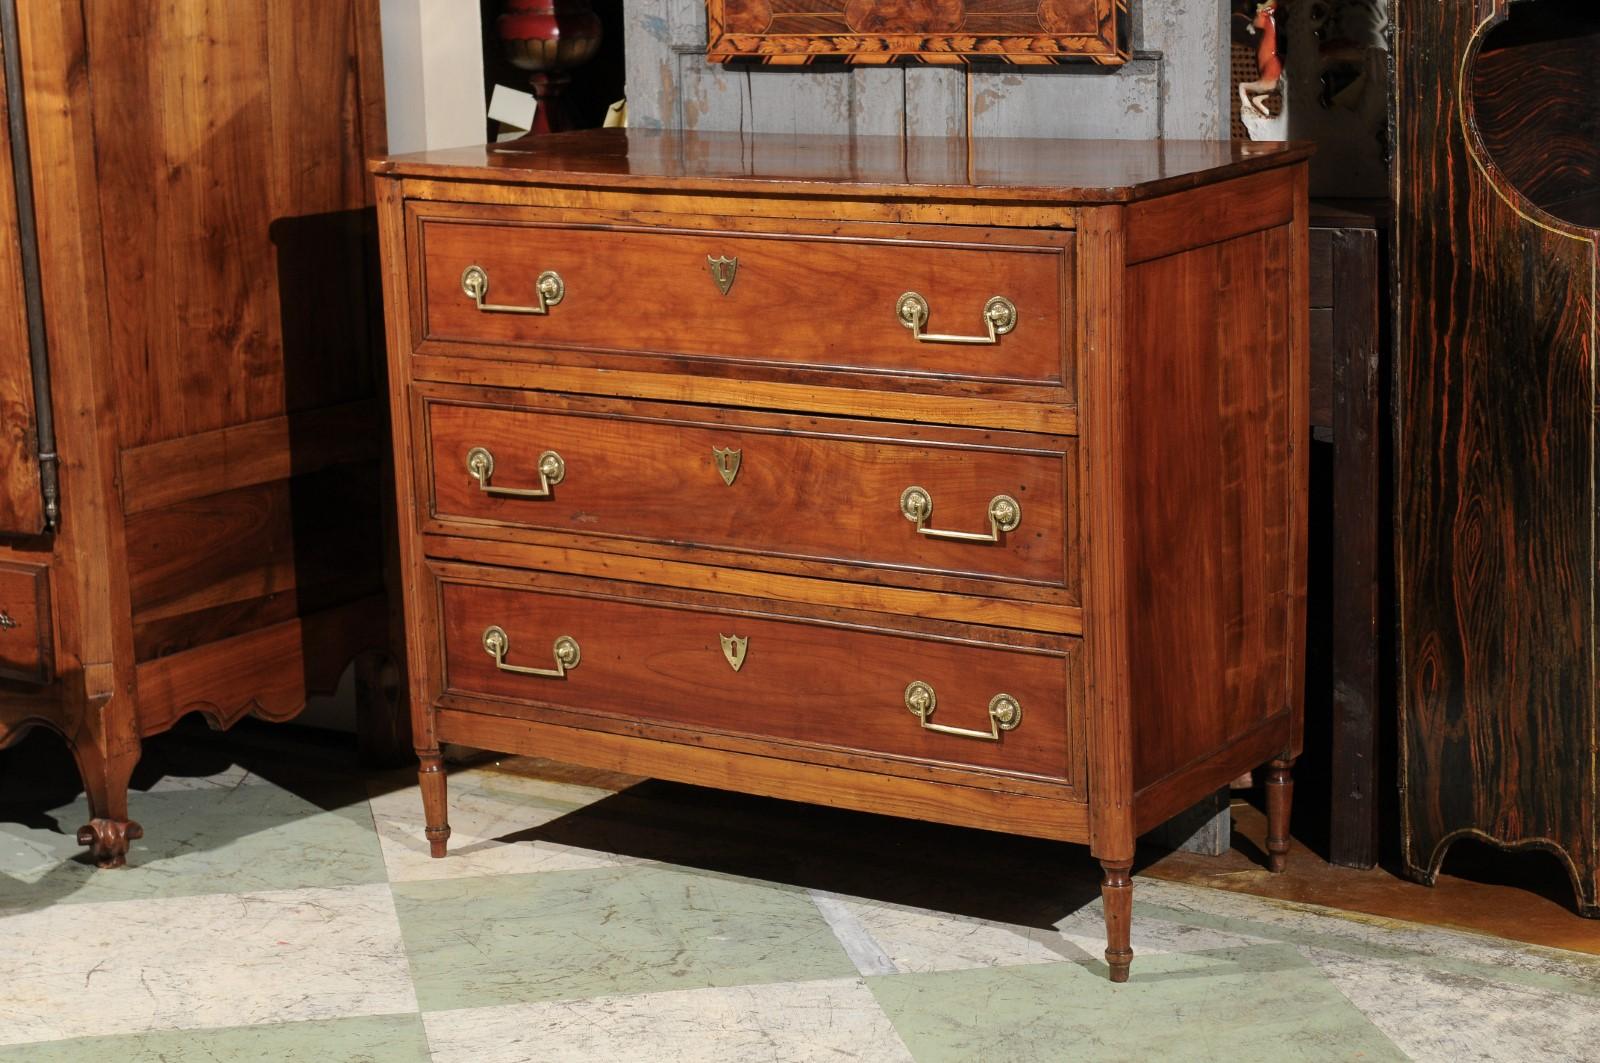 The French Louis XVI fruitwood commode with rectangular top, 3 drawers, rounded fluted corners ending in turned legs.